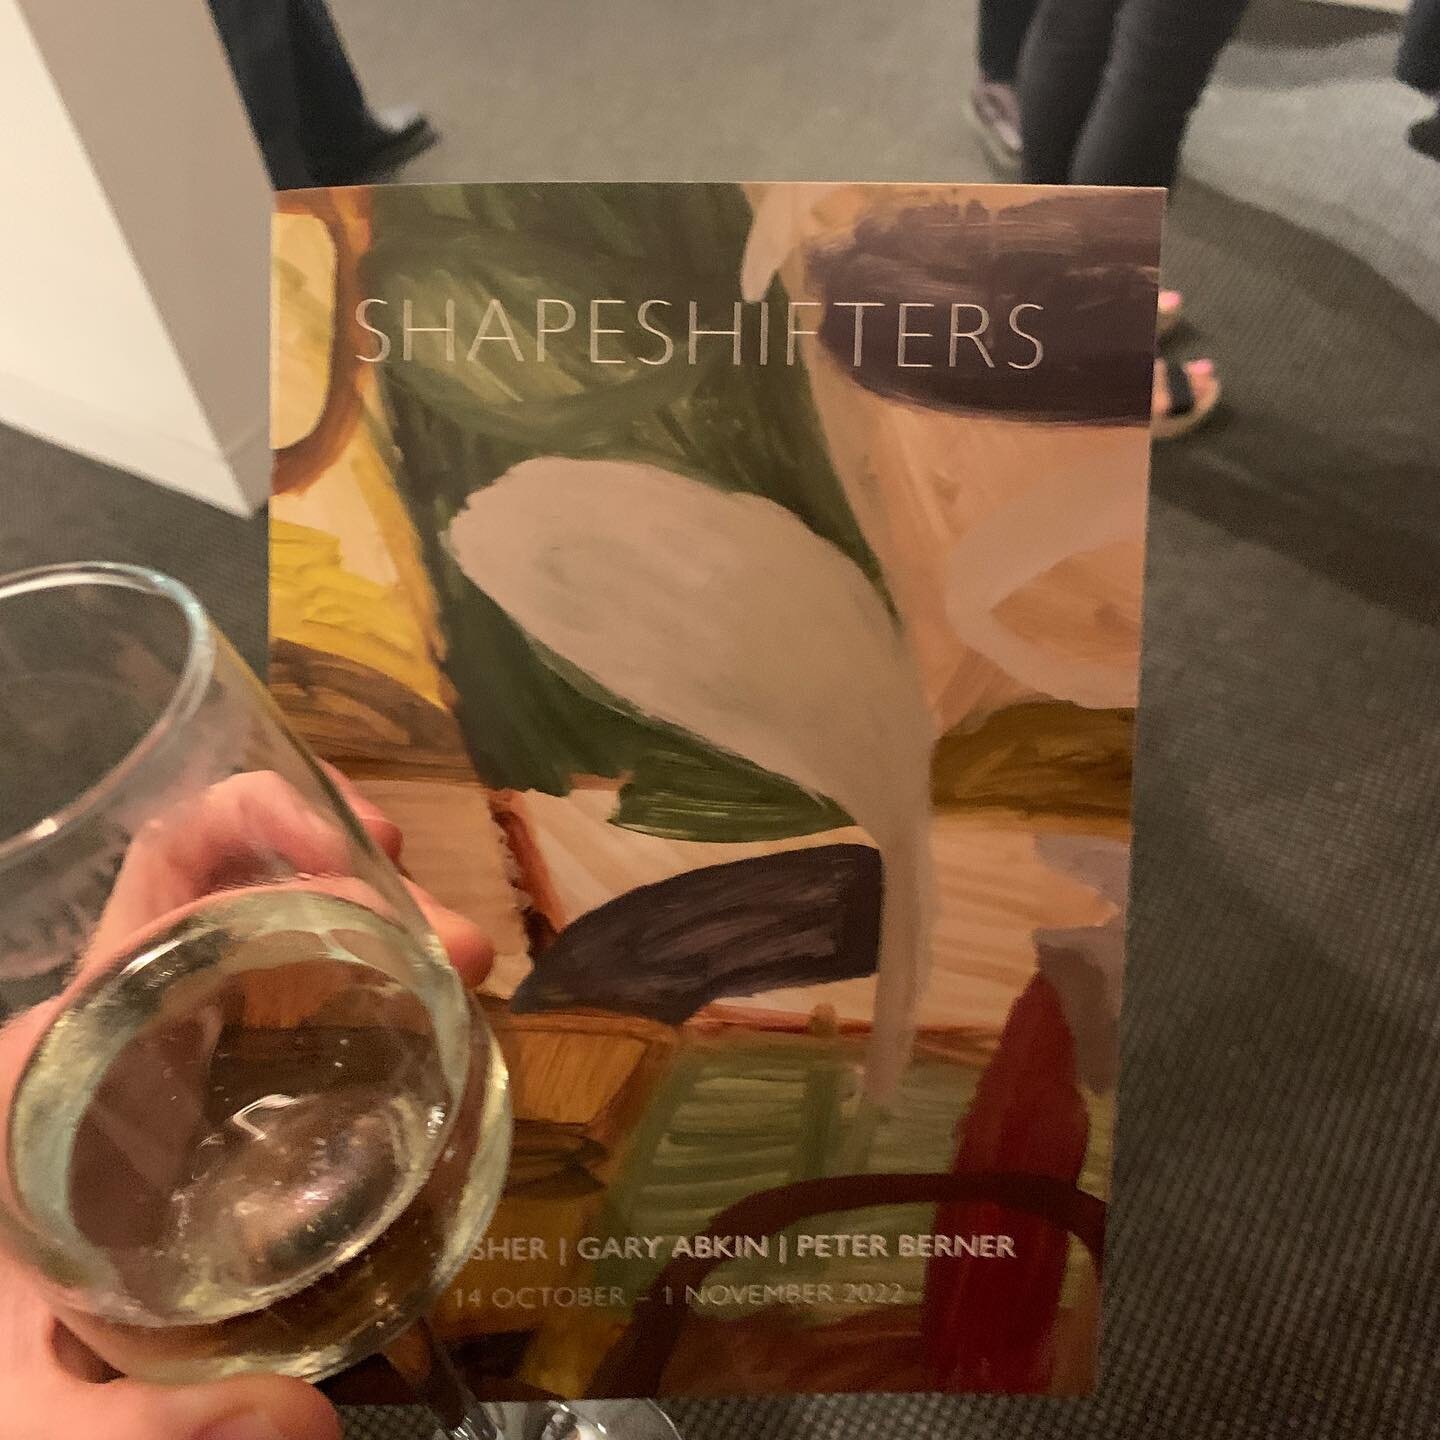 Gorgeous show &lsquo;Shape Shifters&rsquo; opened tonight @lethbridgegallery featuring work by @the_david_usher, Gary Abkin and  Peter Berner.